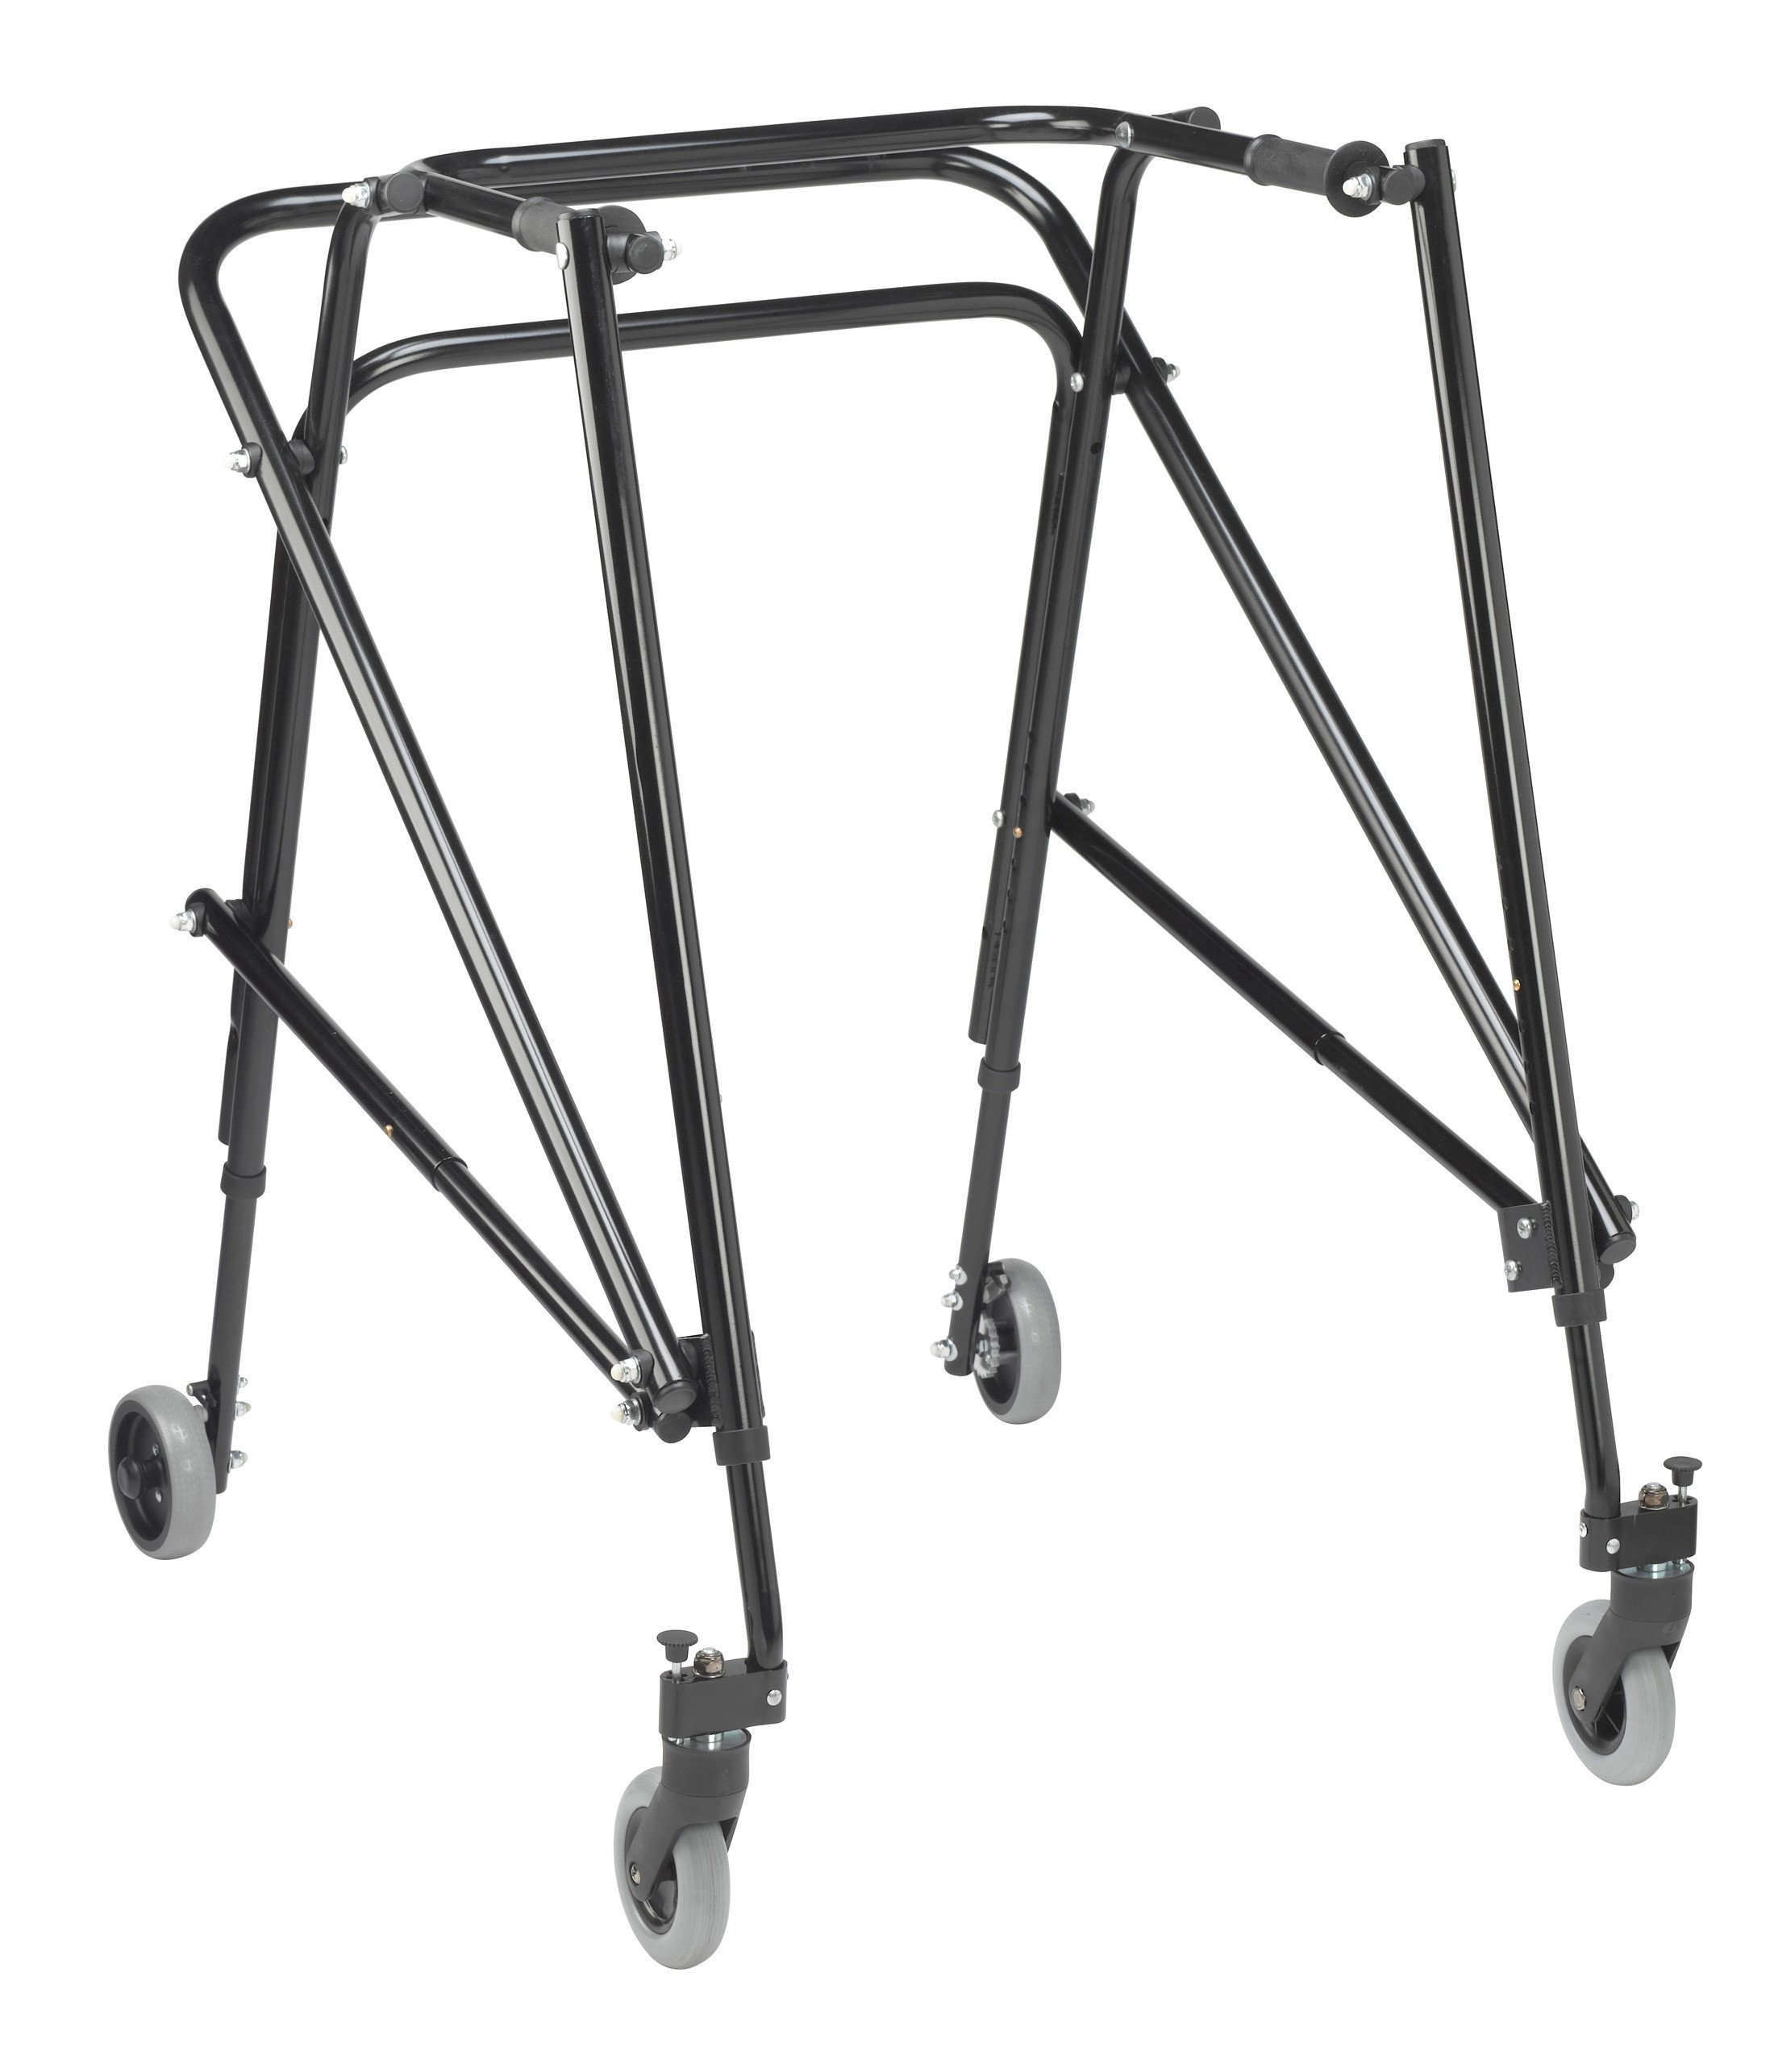 Nimbo 2G Lightweight Posterior Walker - Extra Large - Emperor Black - Angle View